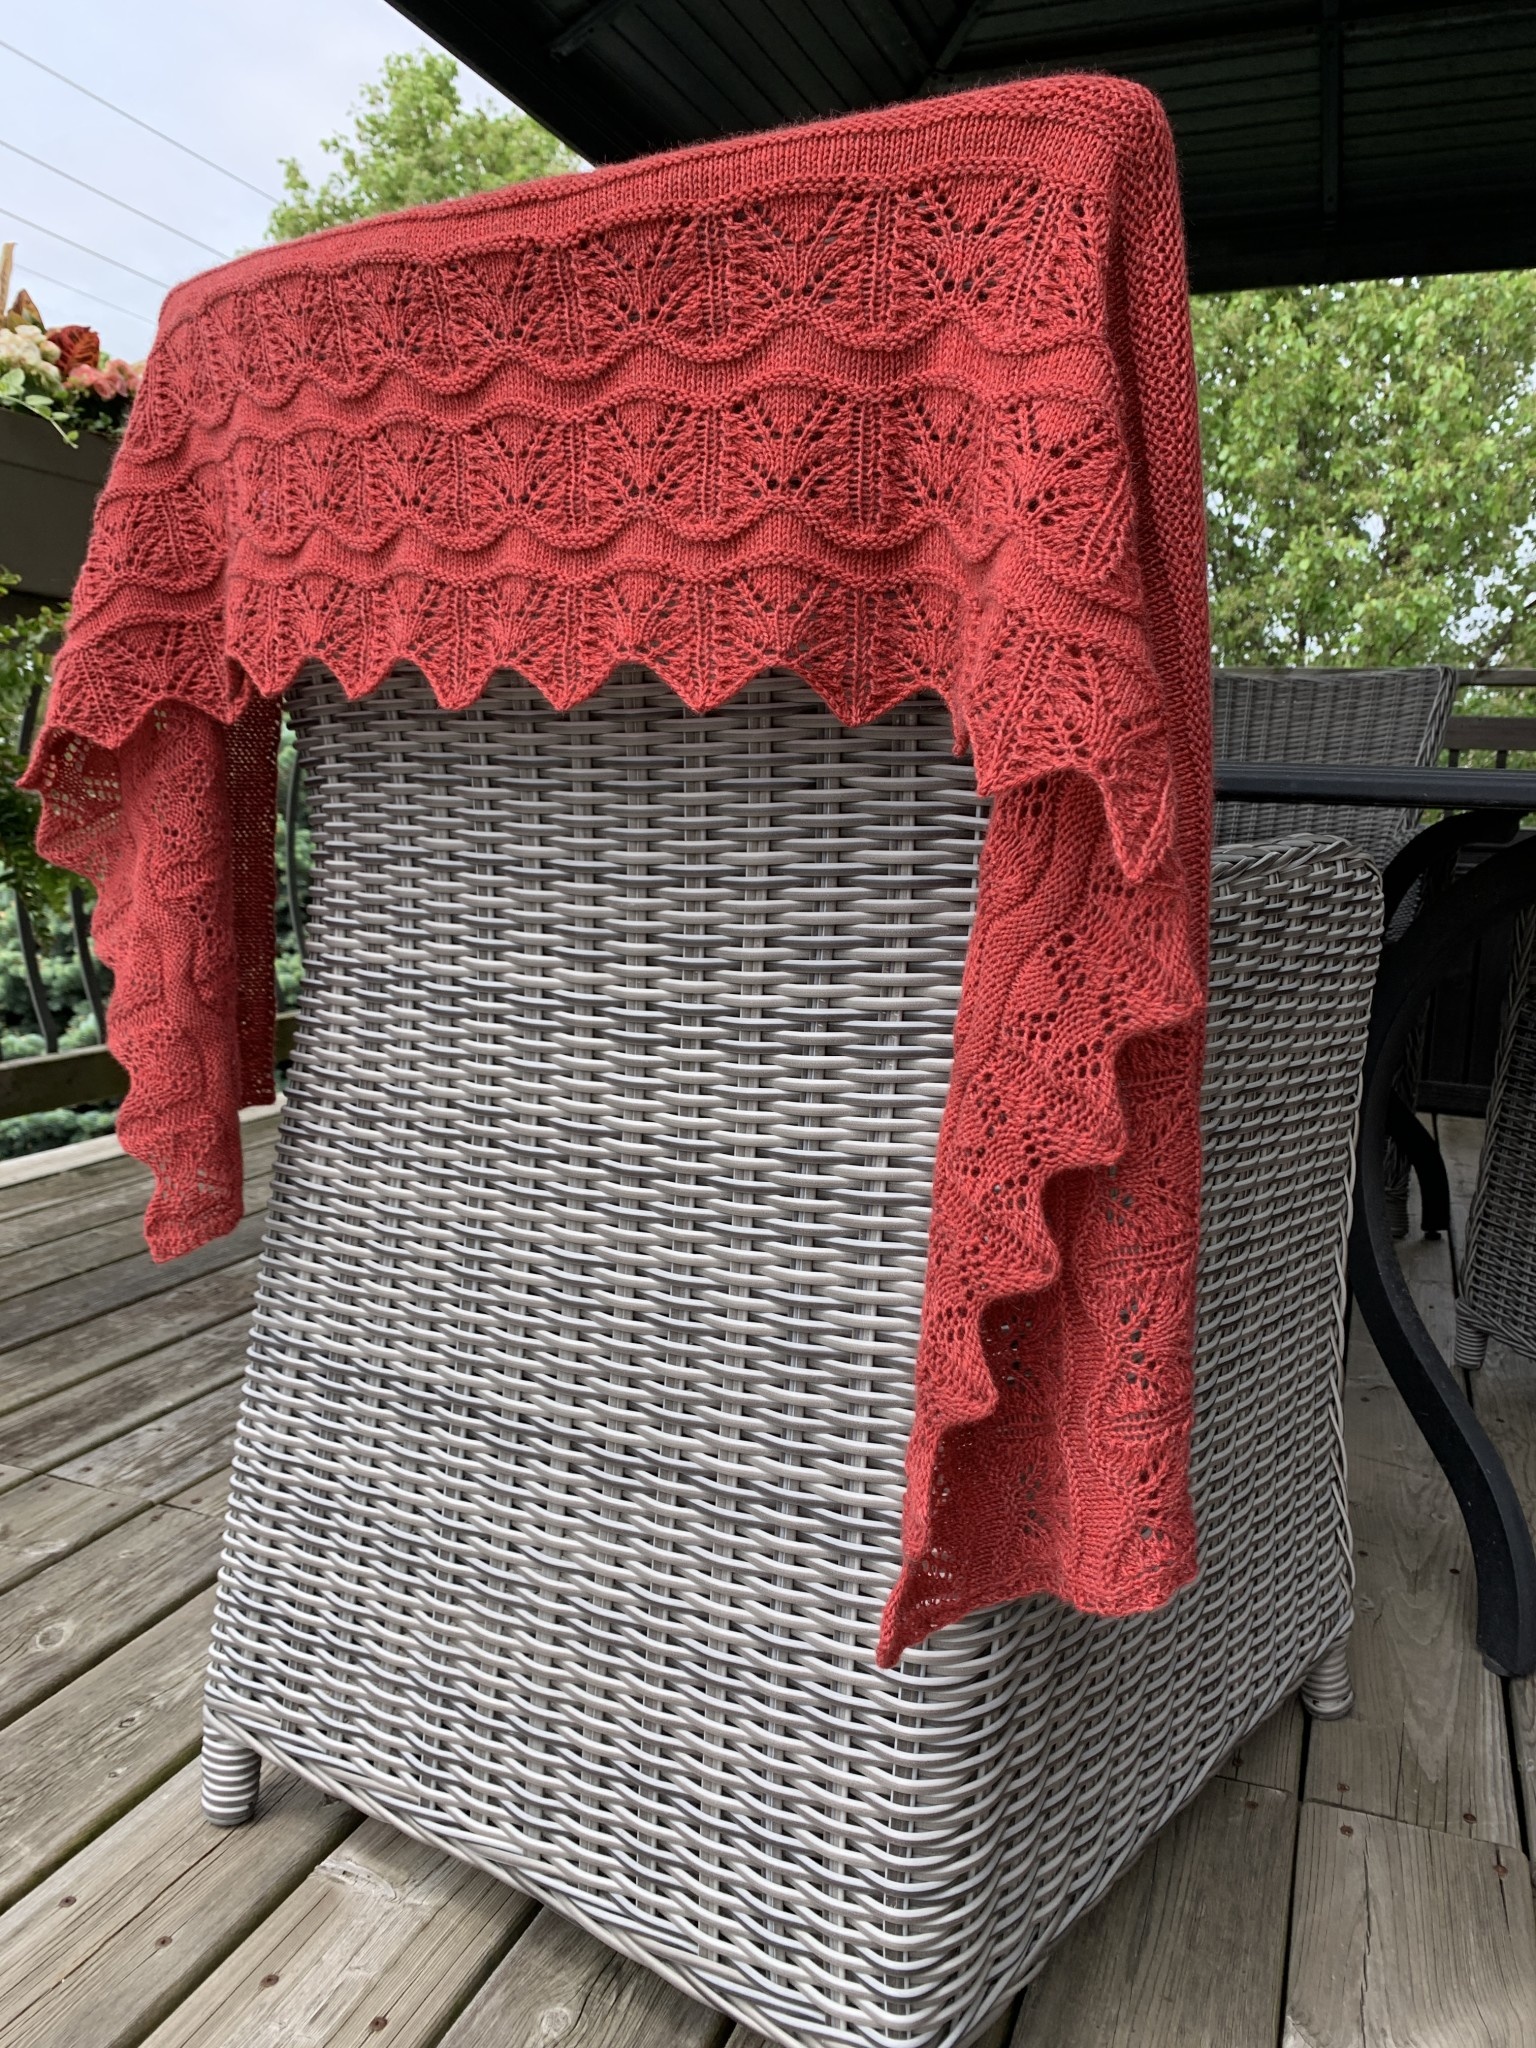 Coterie Shawl By Jessica Ays Kit